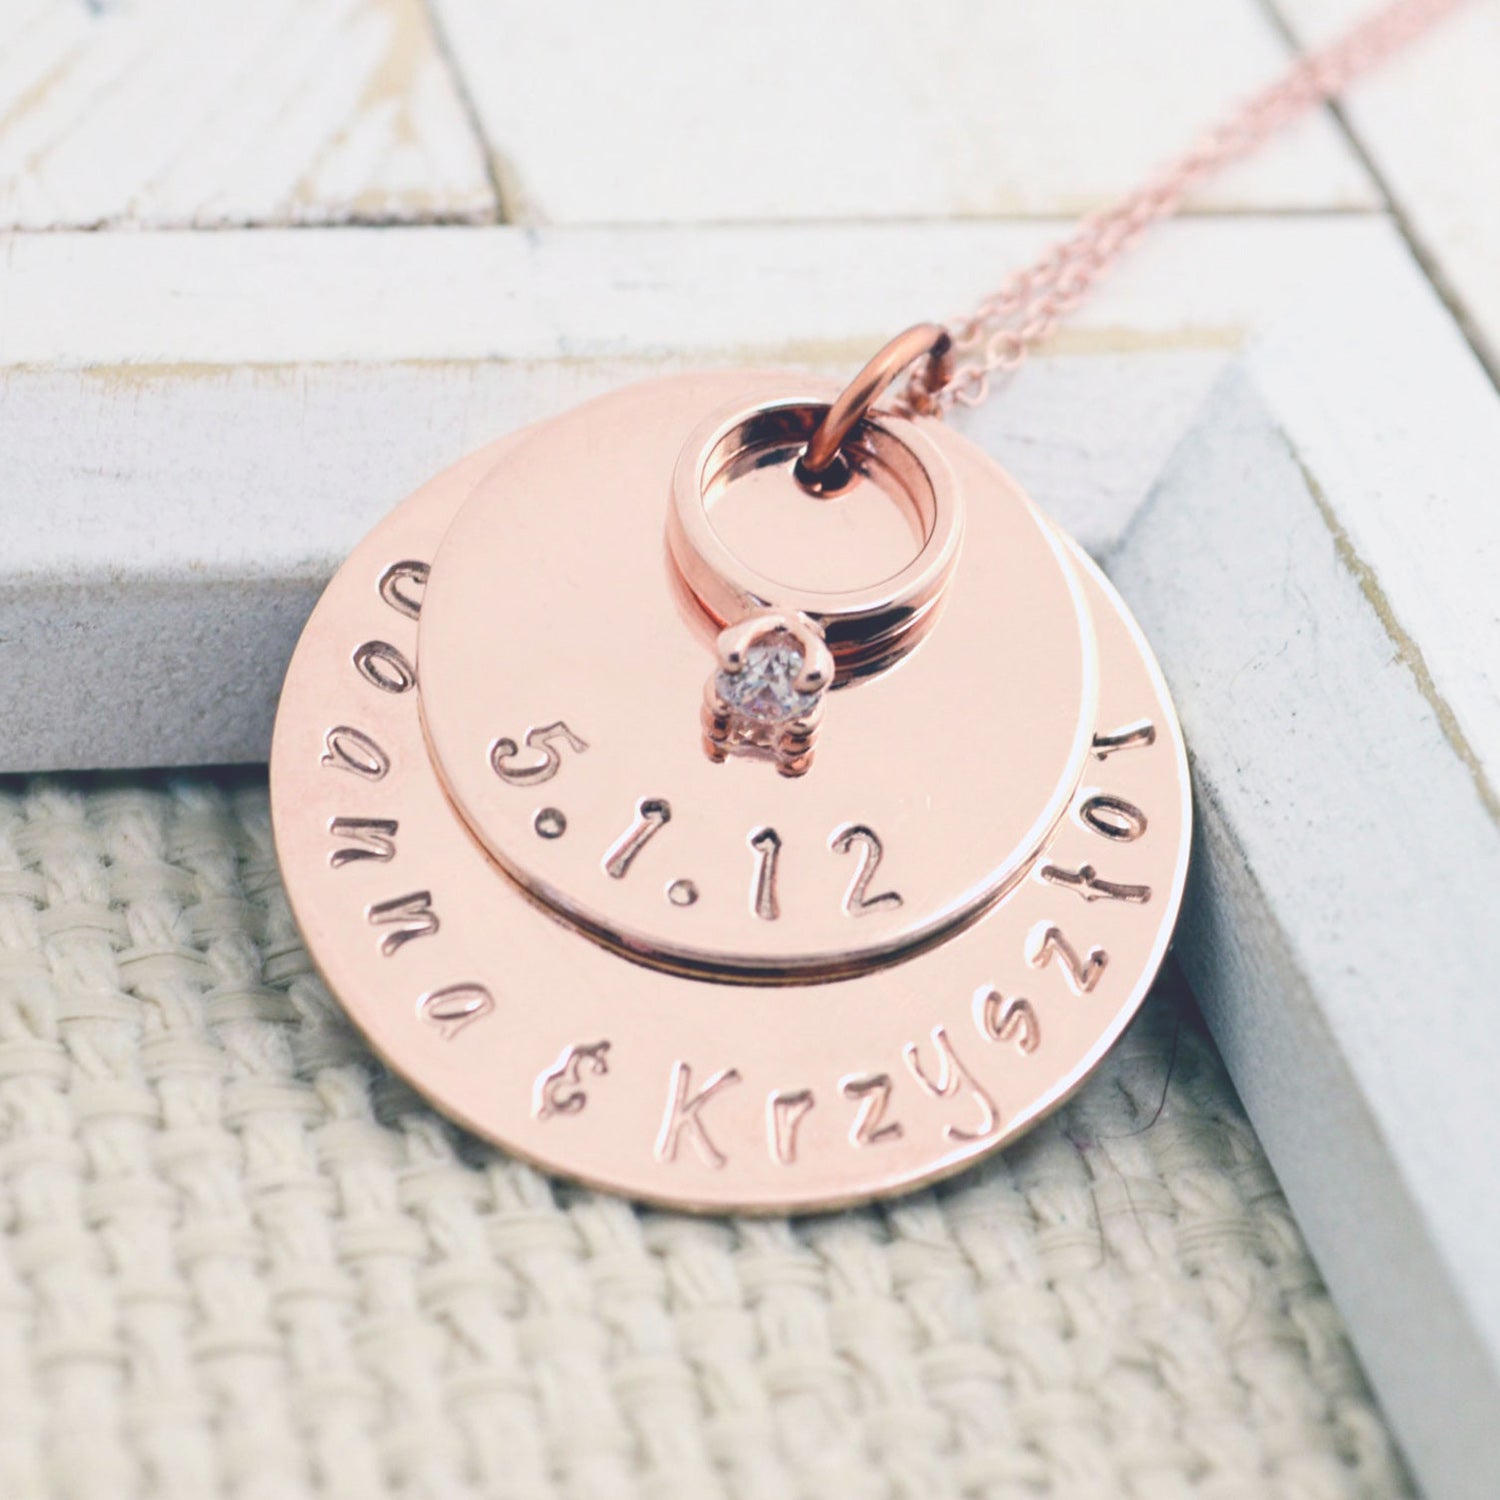 Rose Gold Wedding Ring Necklace - Love It Personalized